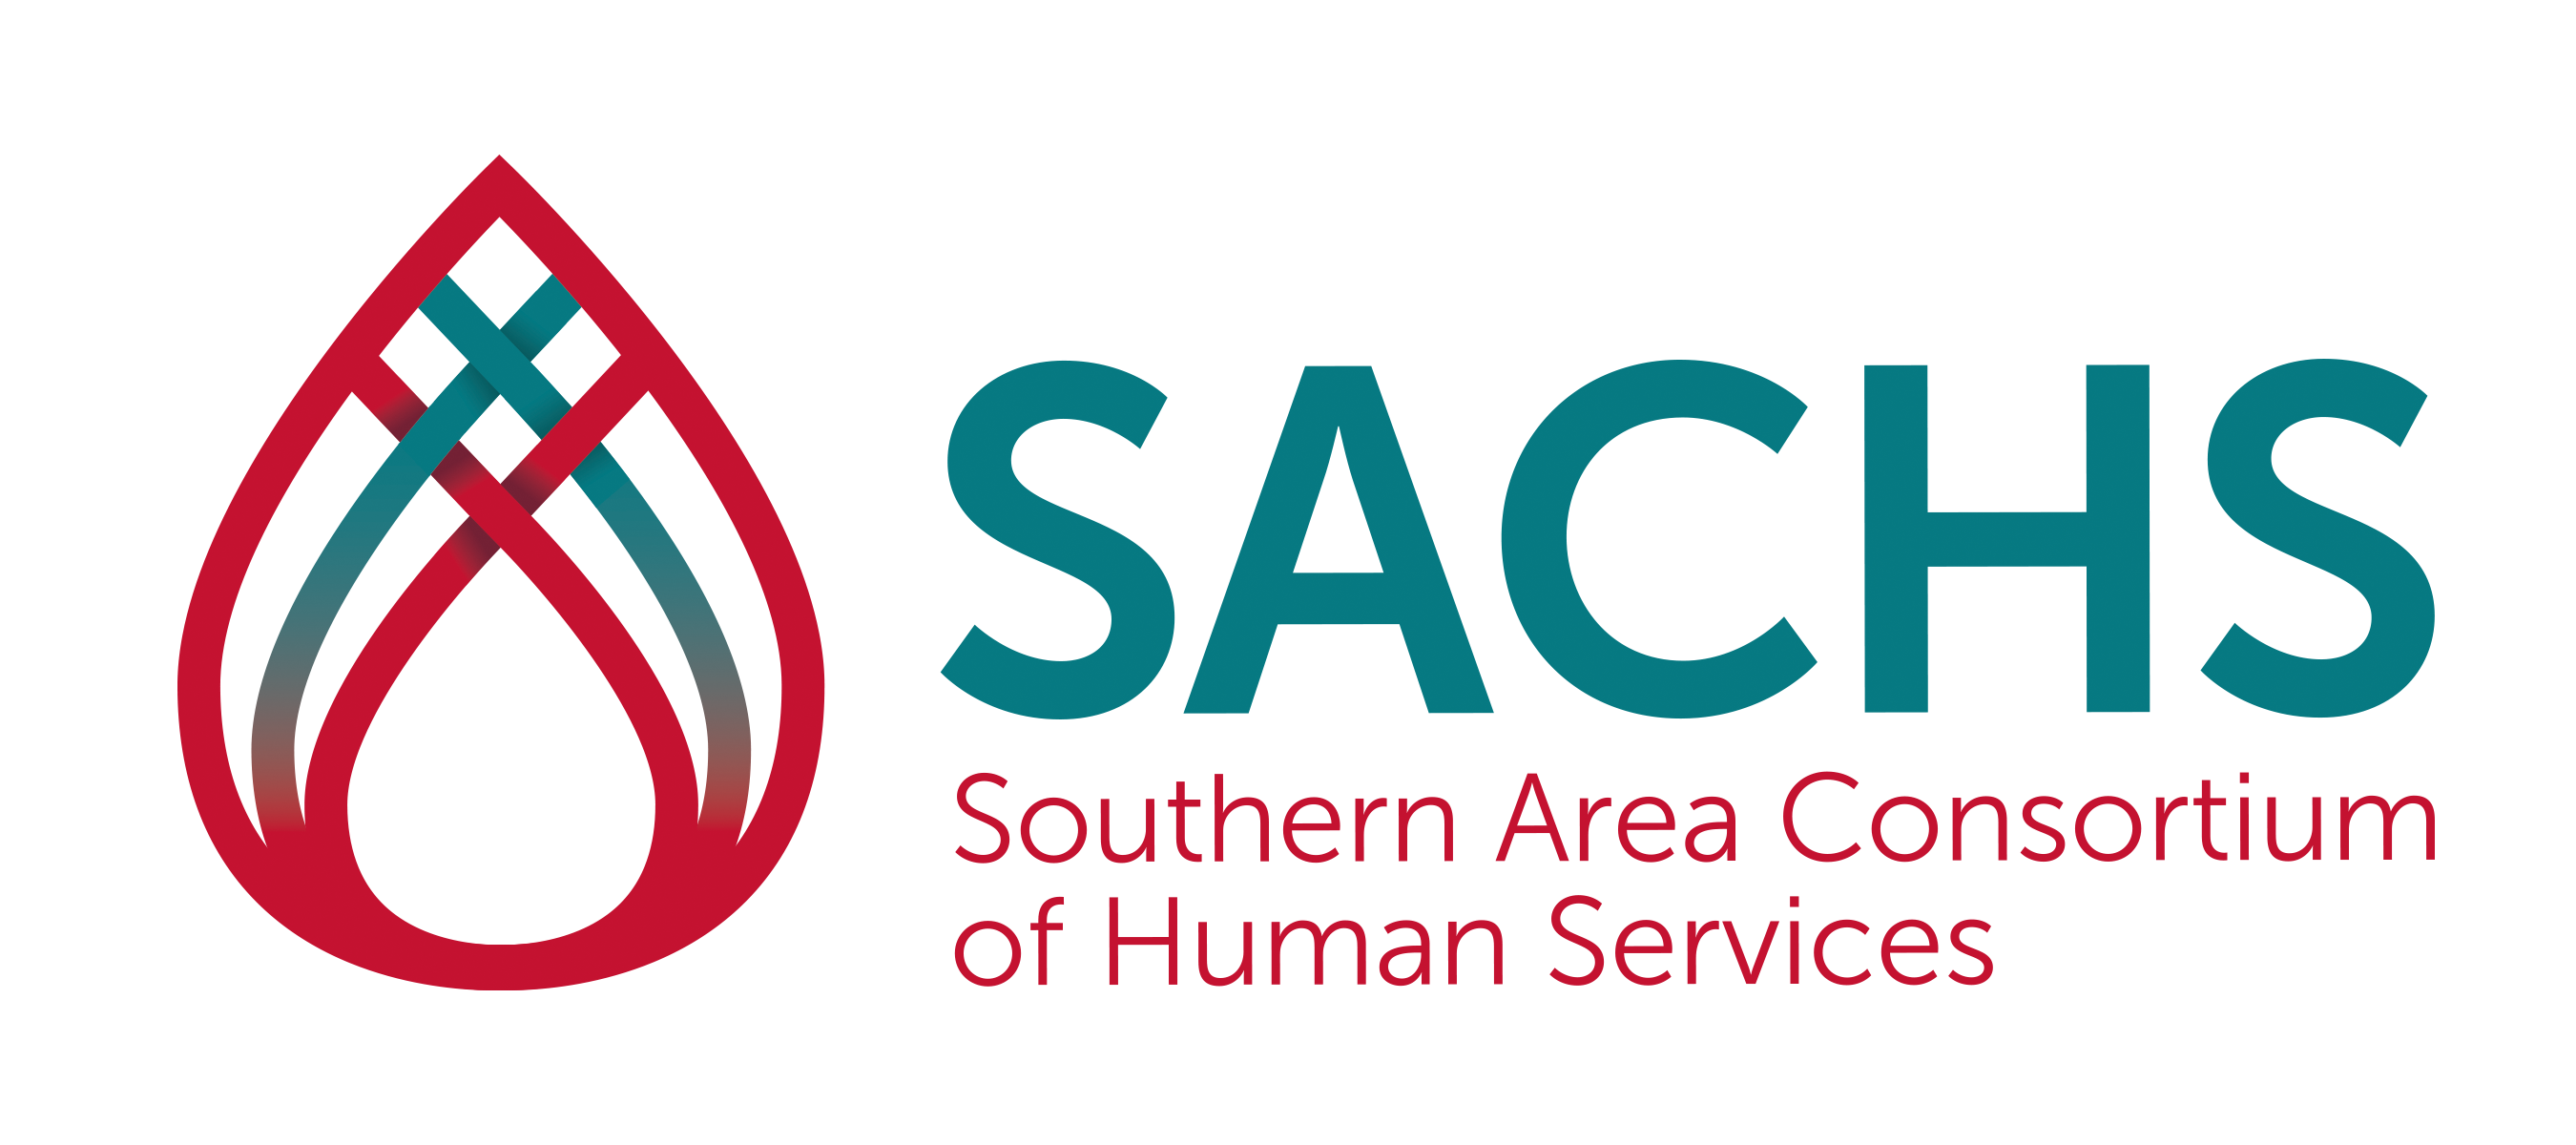 SACHS - Southern Area Consortium of Human Services Logo